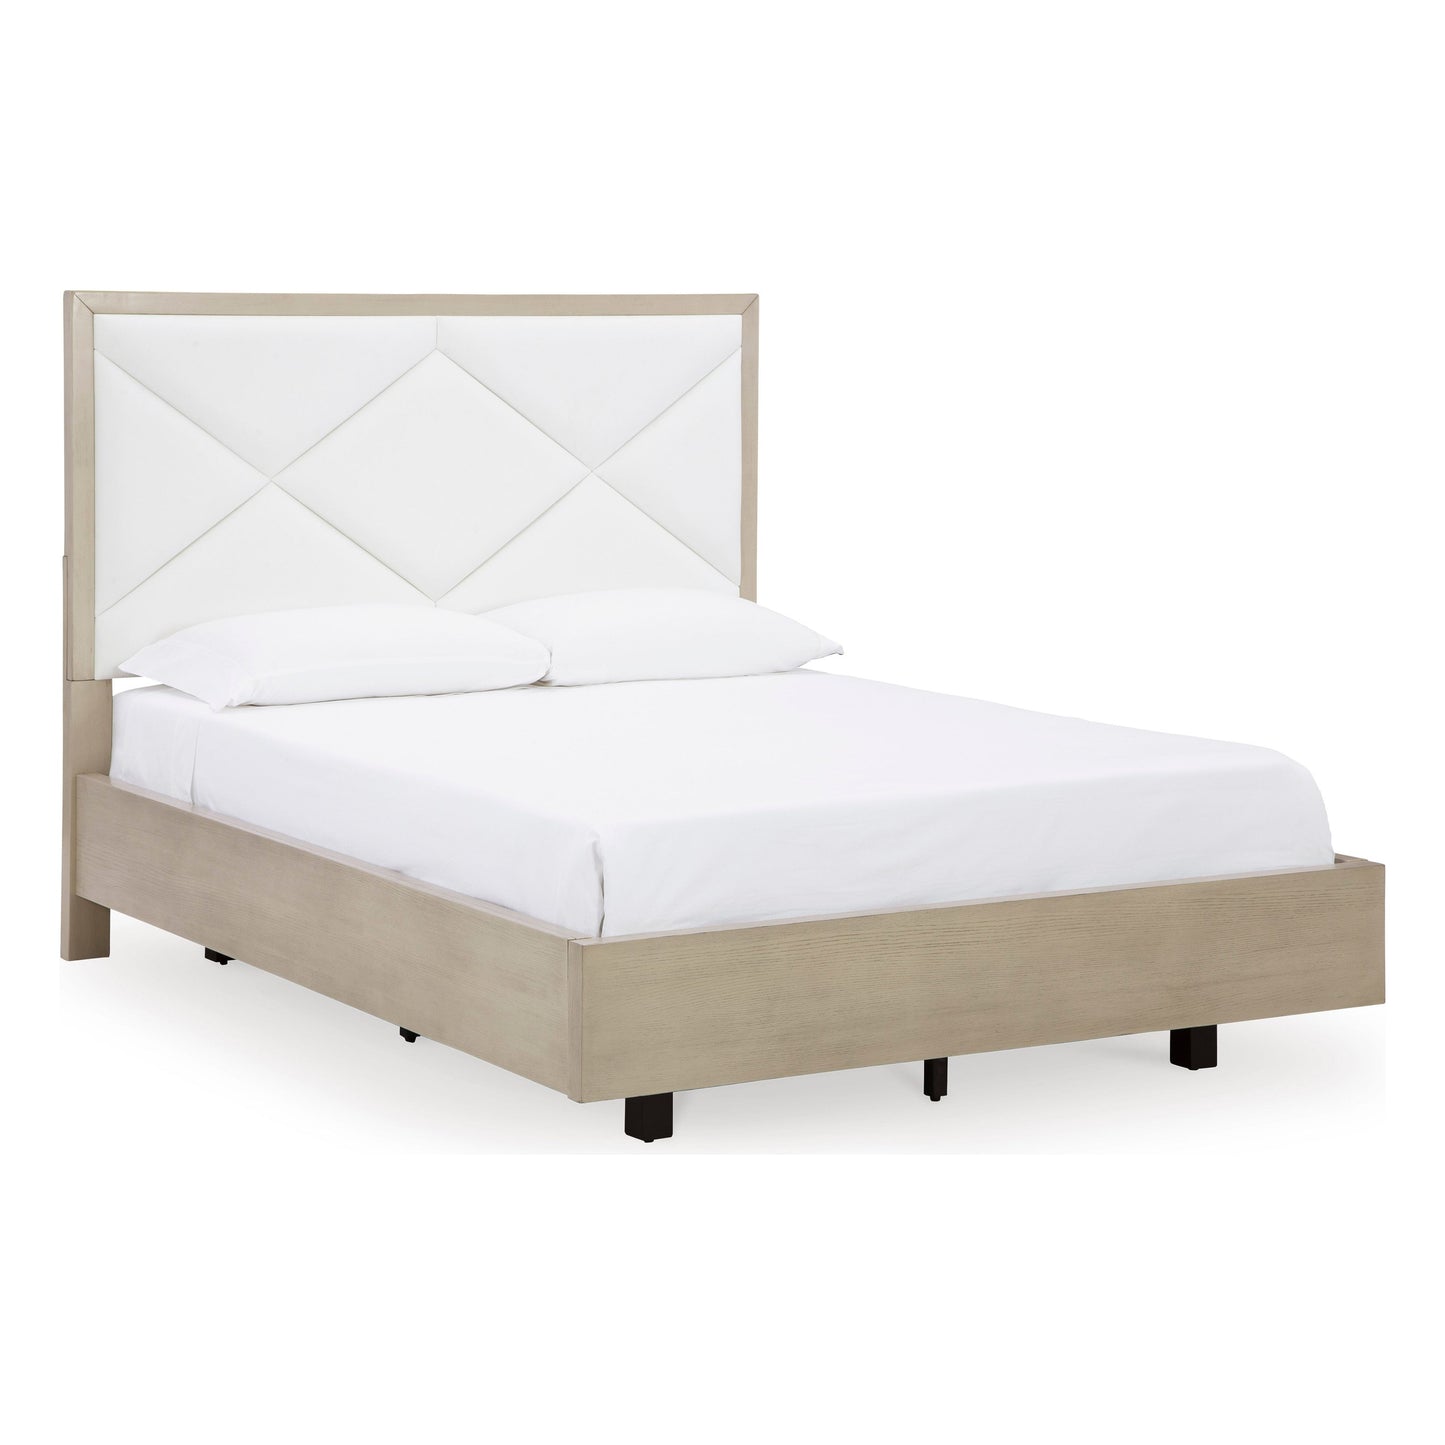 WENDORA UPHOLSTERED BED - BISQUE/ WHITE